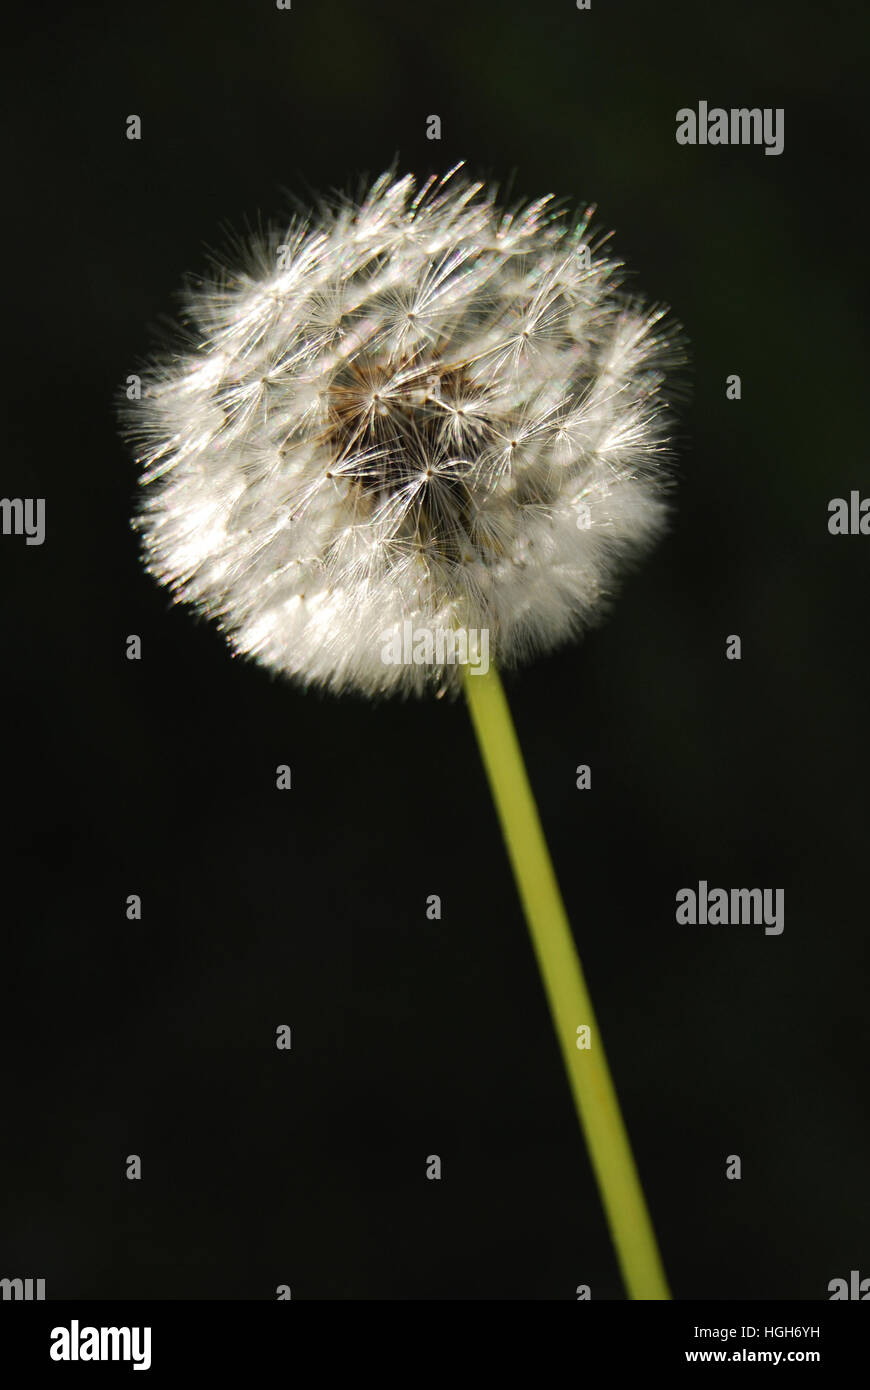 Close up of a white dandelion head's fuzzy seeds. Stock Photo